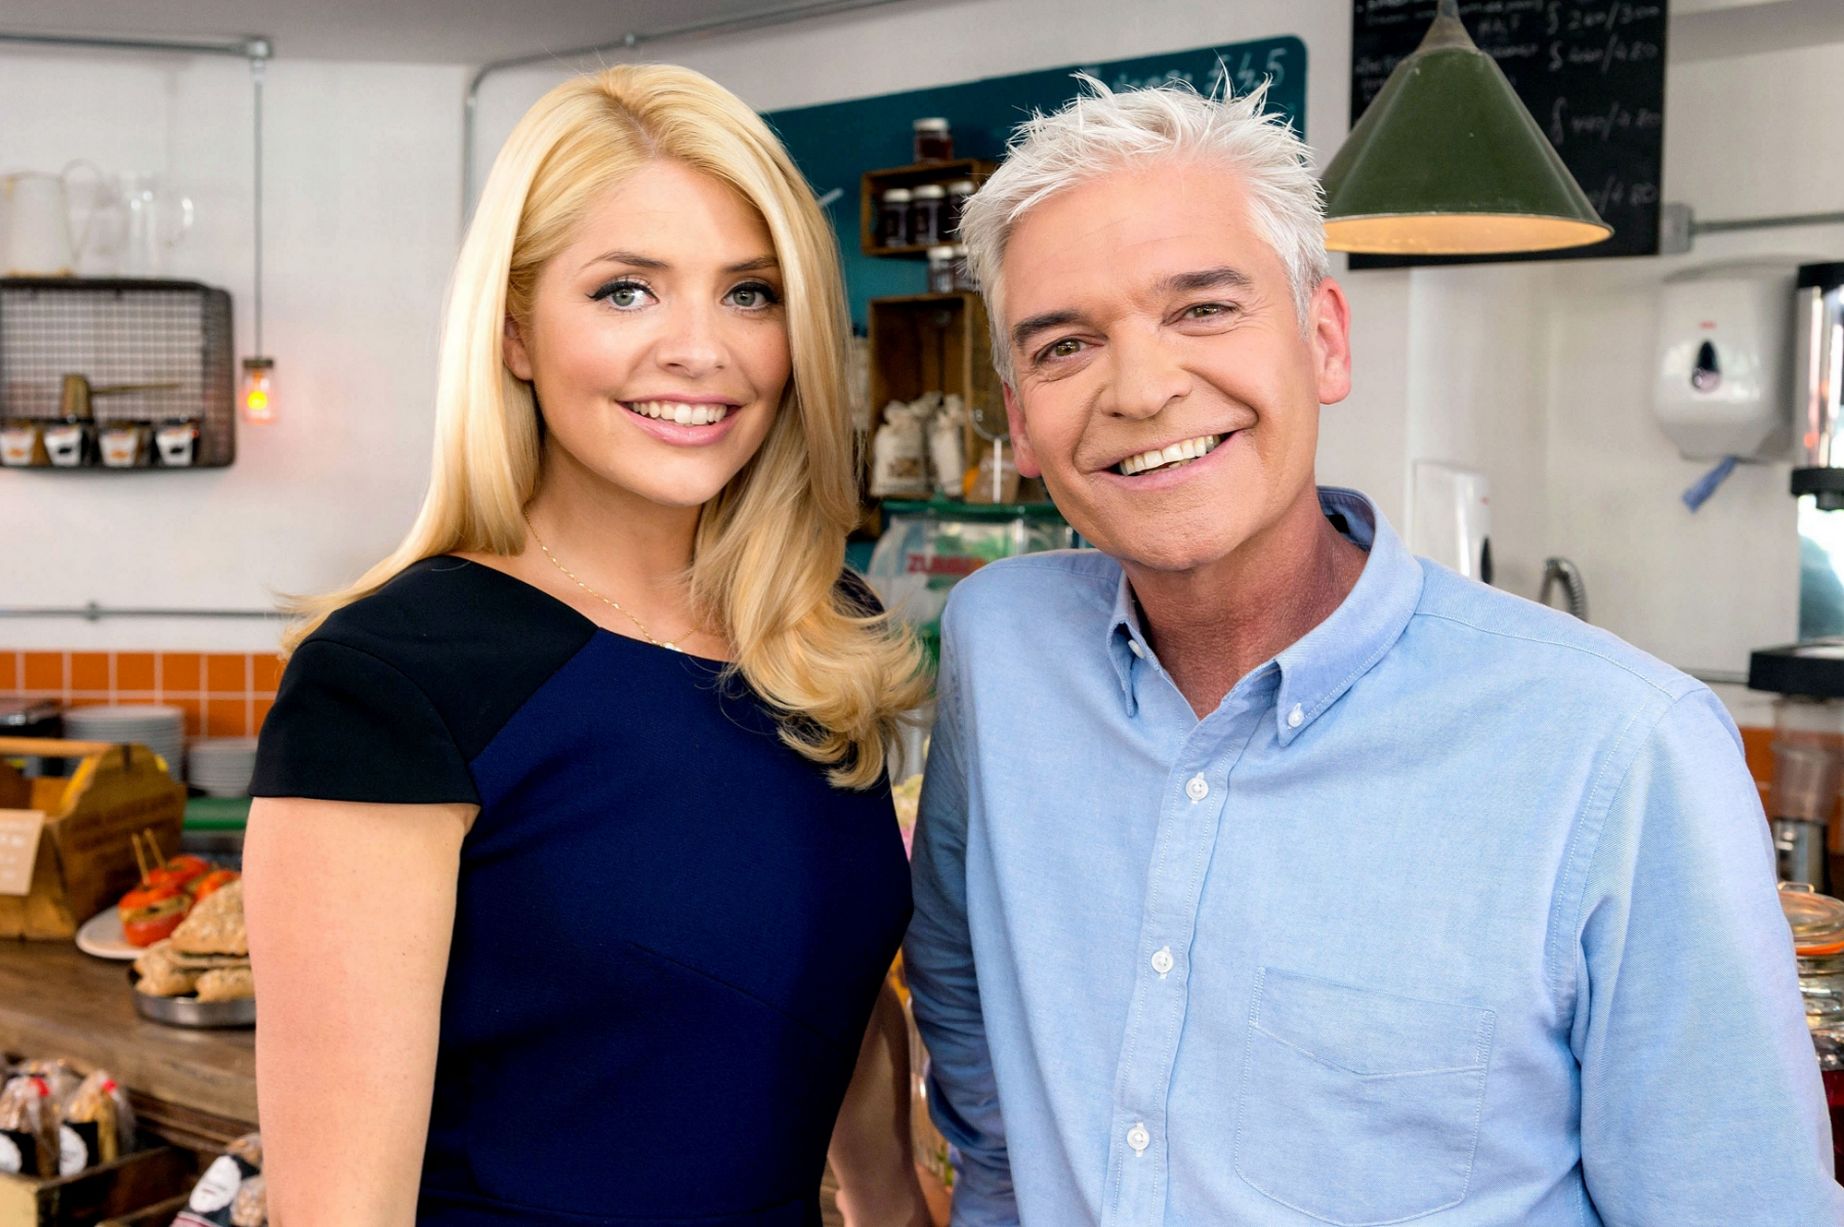 Holly-Willoughby-behind-the-scenes-at-the-making-of-the-new-This-Morning-promo